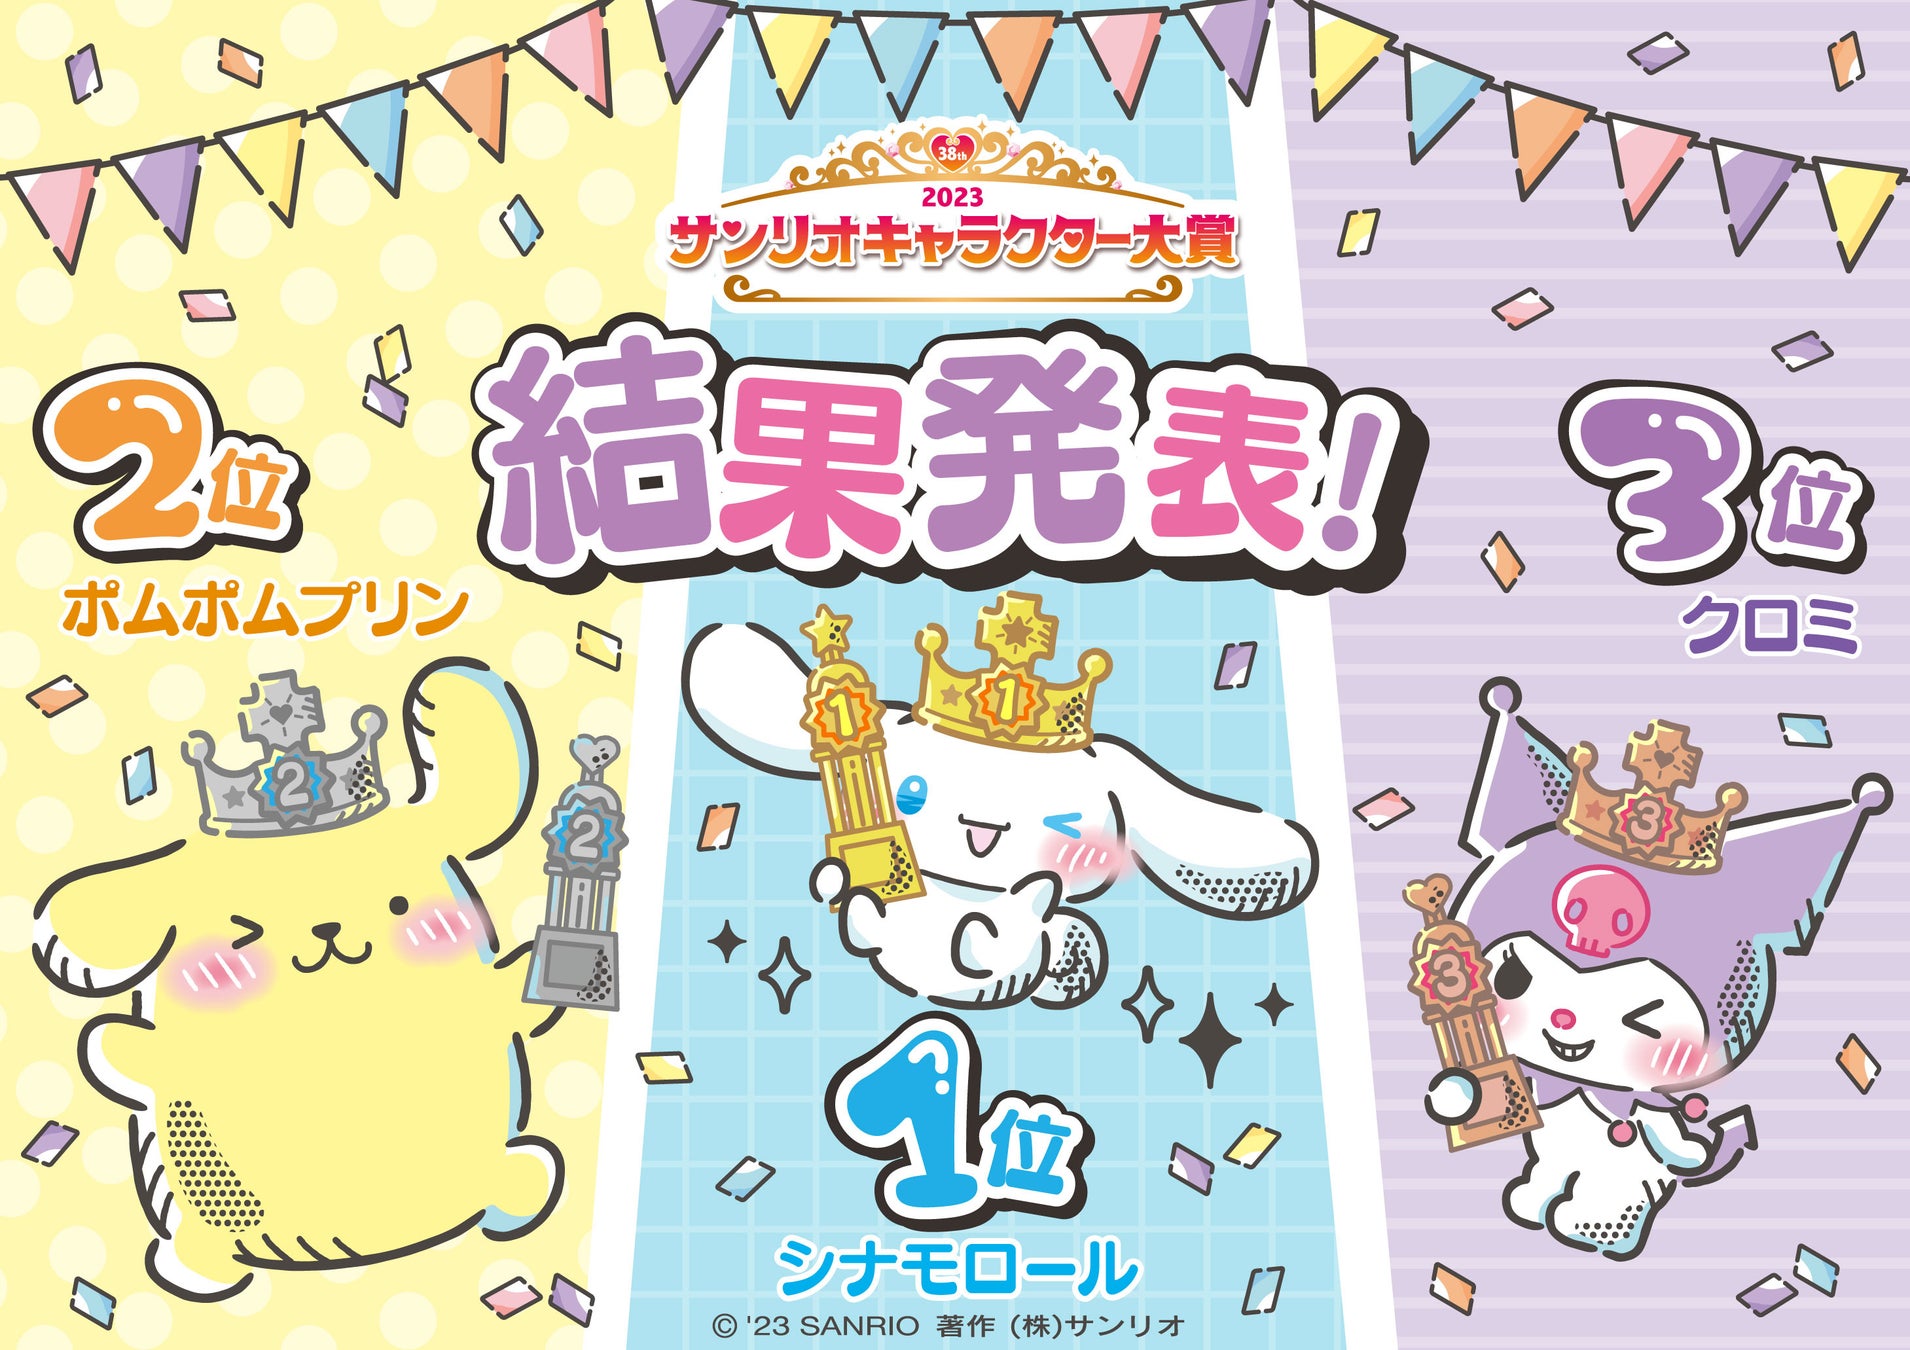 Sanrio Characters Collaboration Cafe 2021  Events in Chiba  Japan Travel